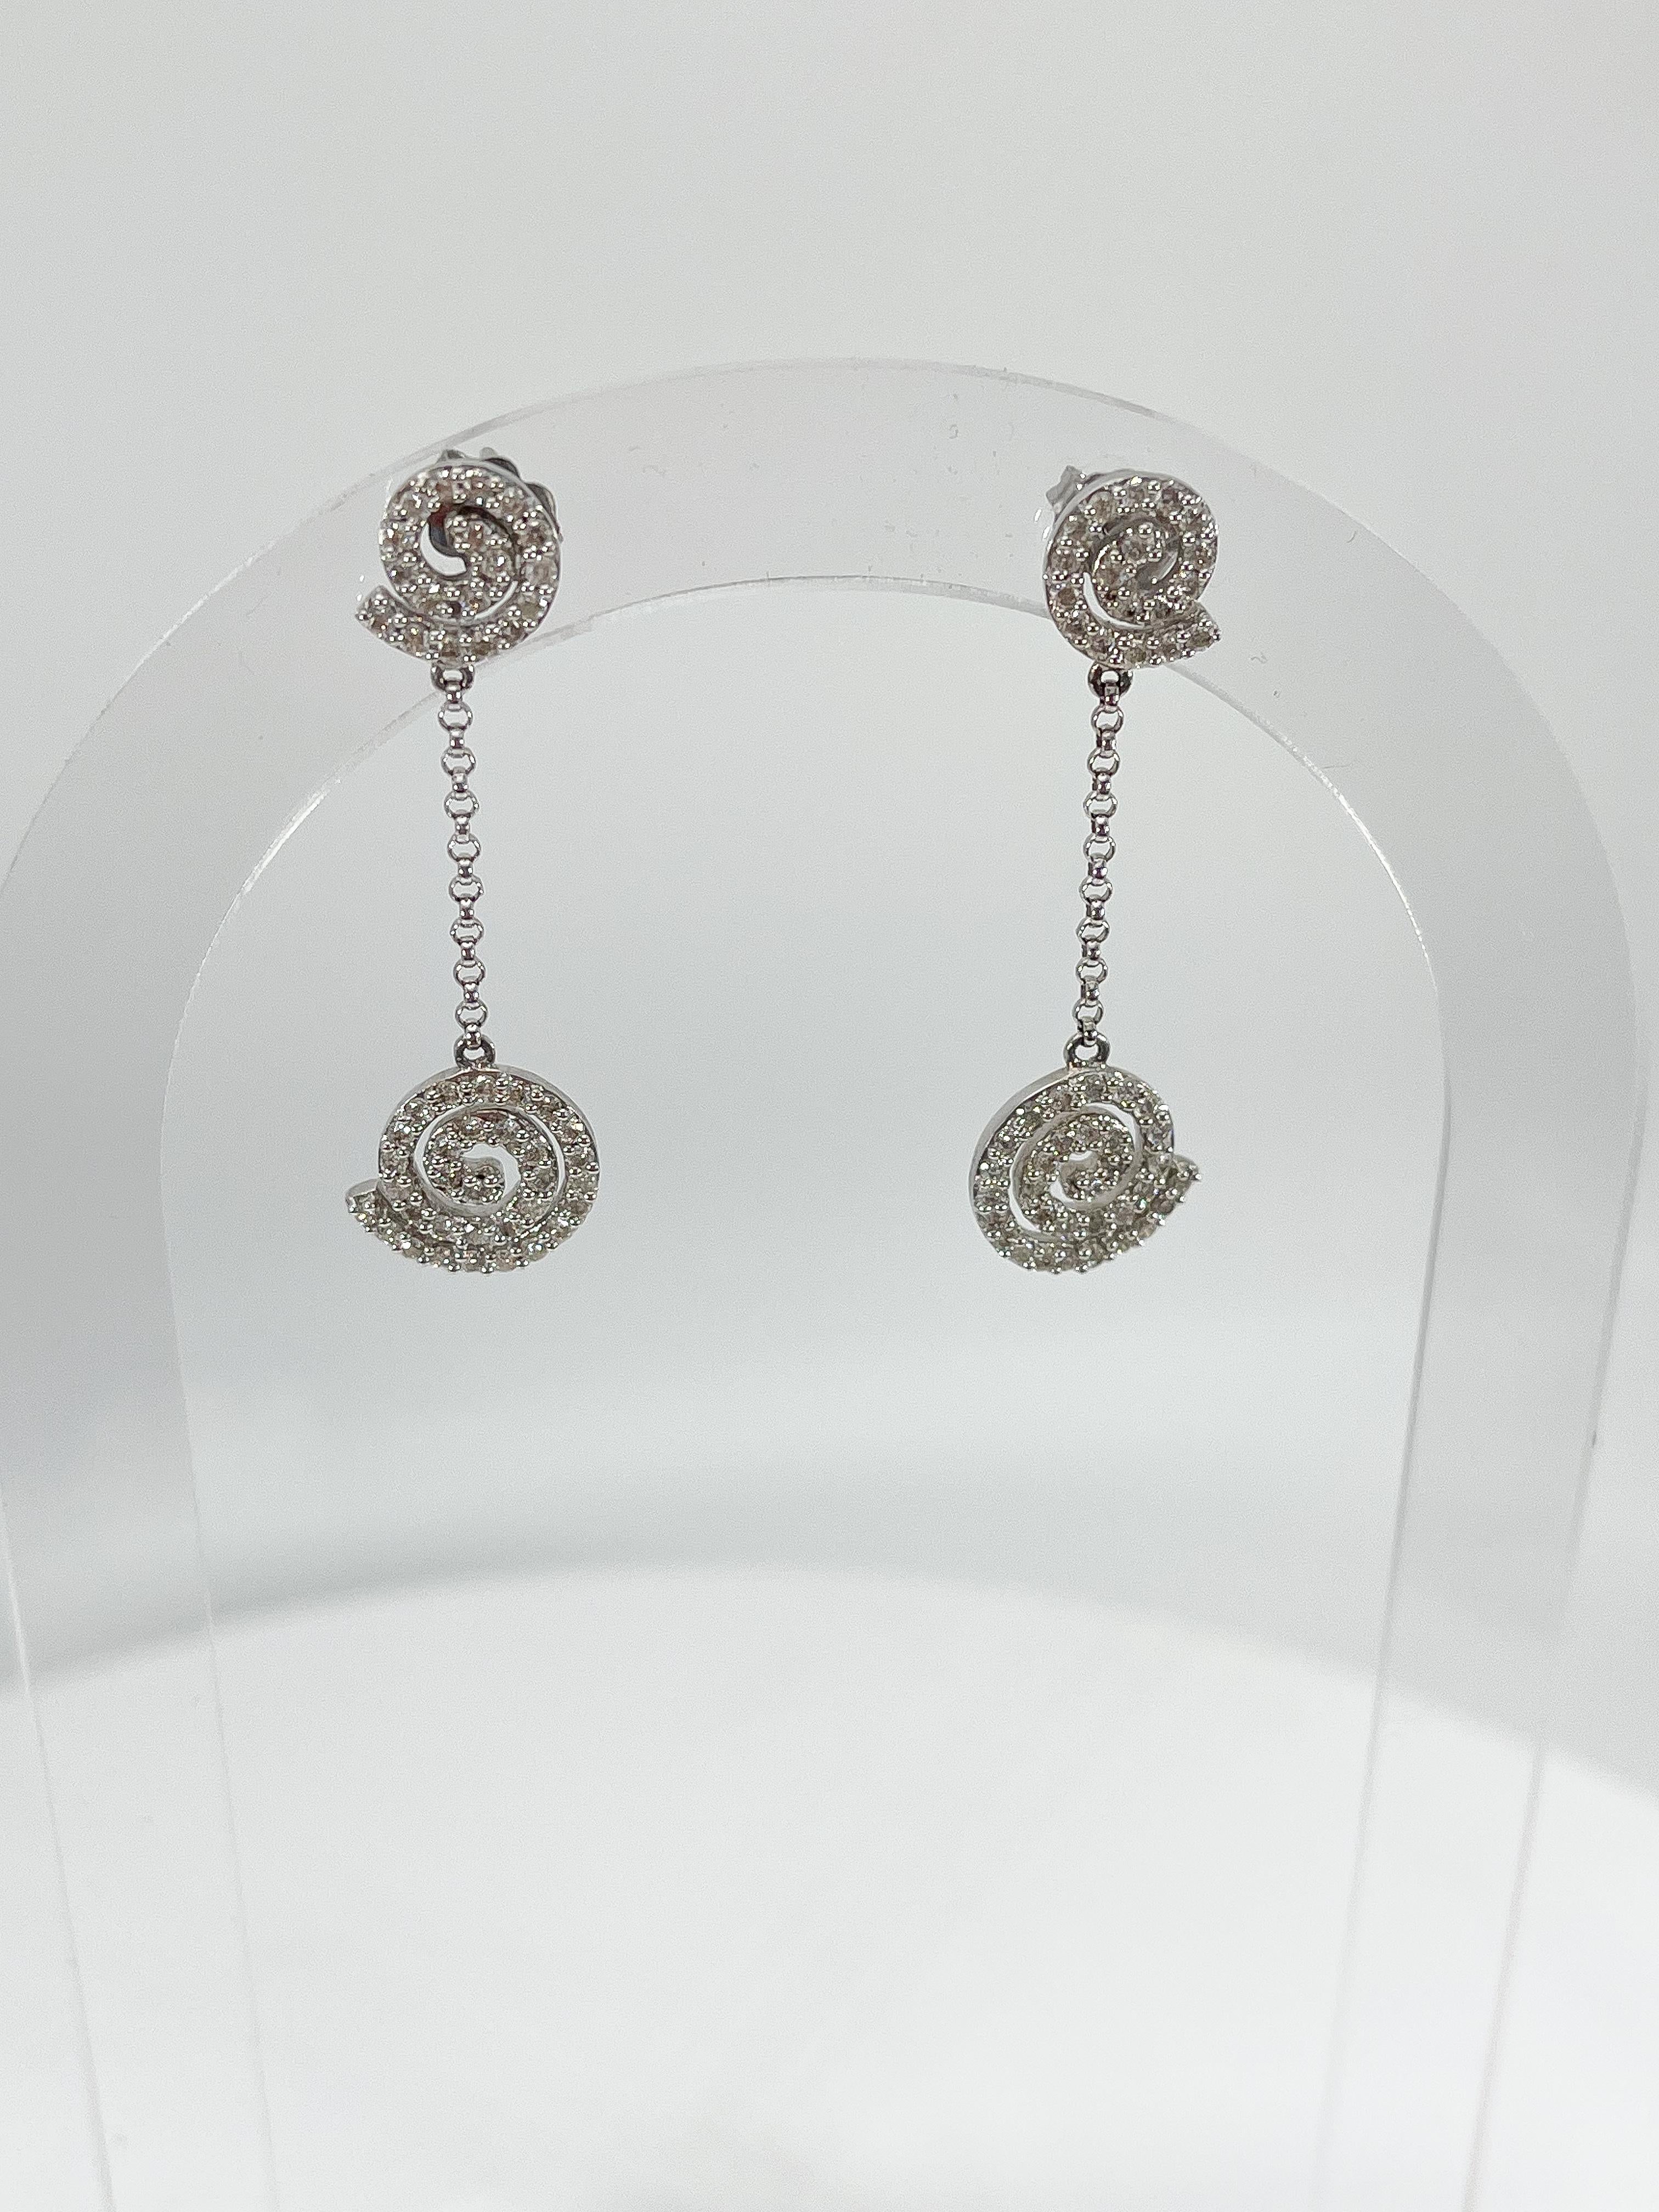 14k white gold circle swirl 1.06 CTW diamond drop earrings. The diamonds in these earrings are all round, they have a width of 11.7, a length of 40 mm, and they have a total weight of 4.2 grams.